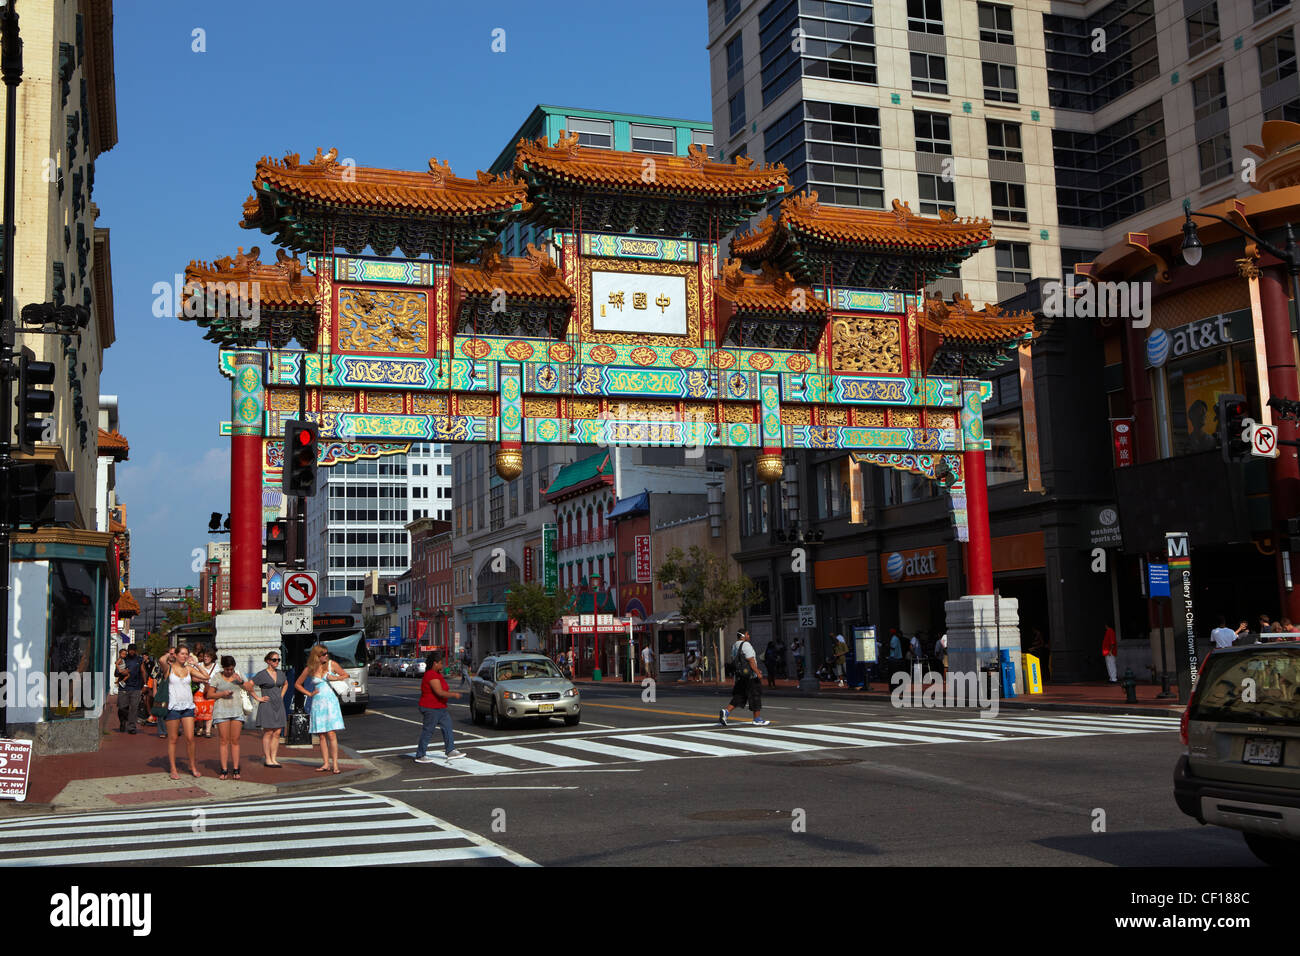 The Friendship Arch entrance to the Chinatown section of Washington, DC. Stock Photo